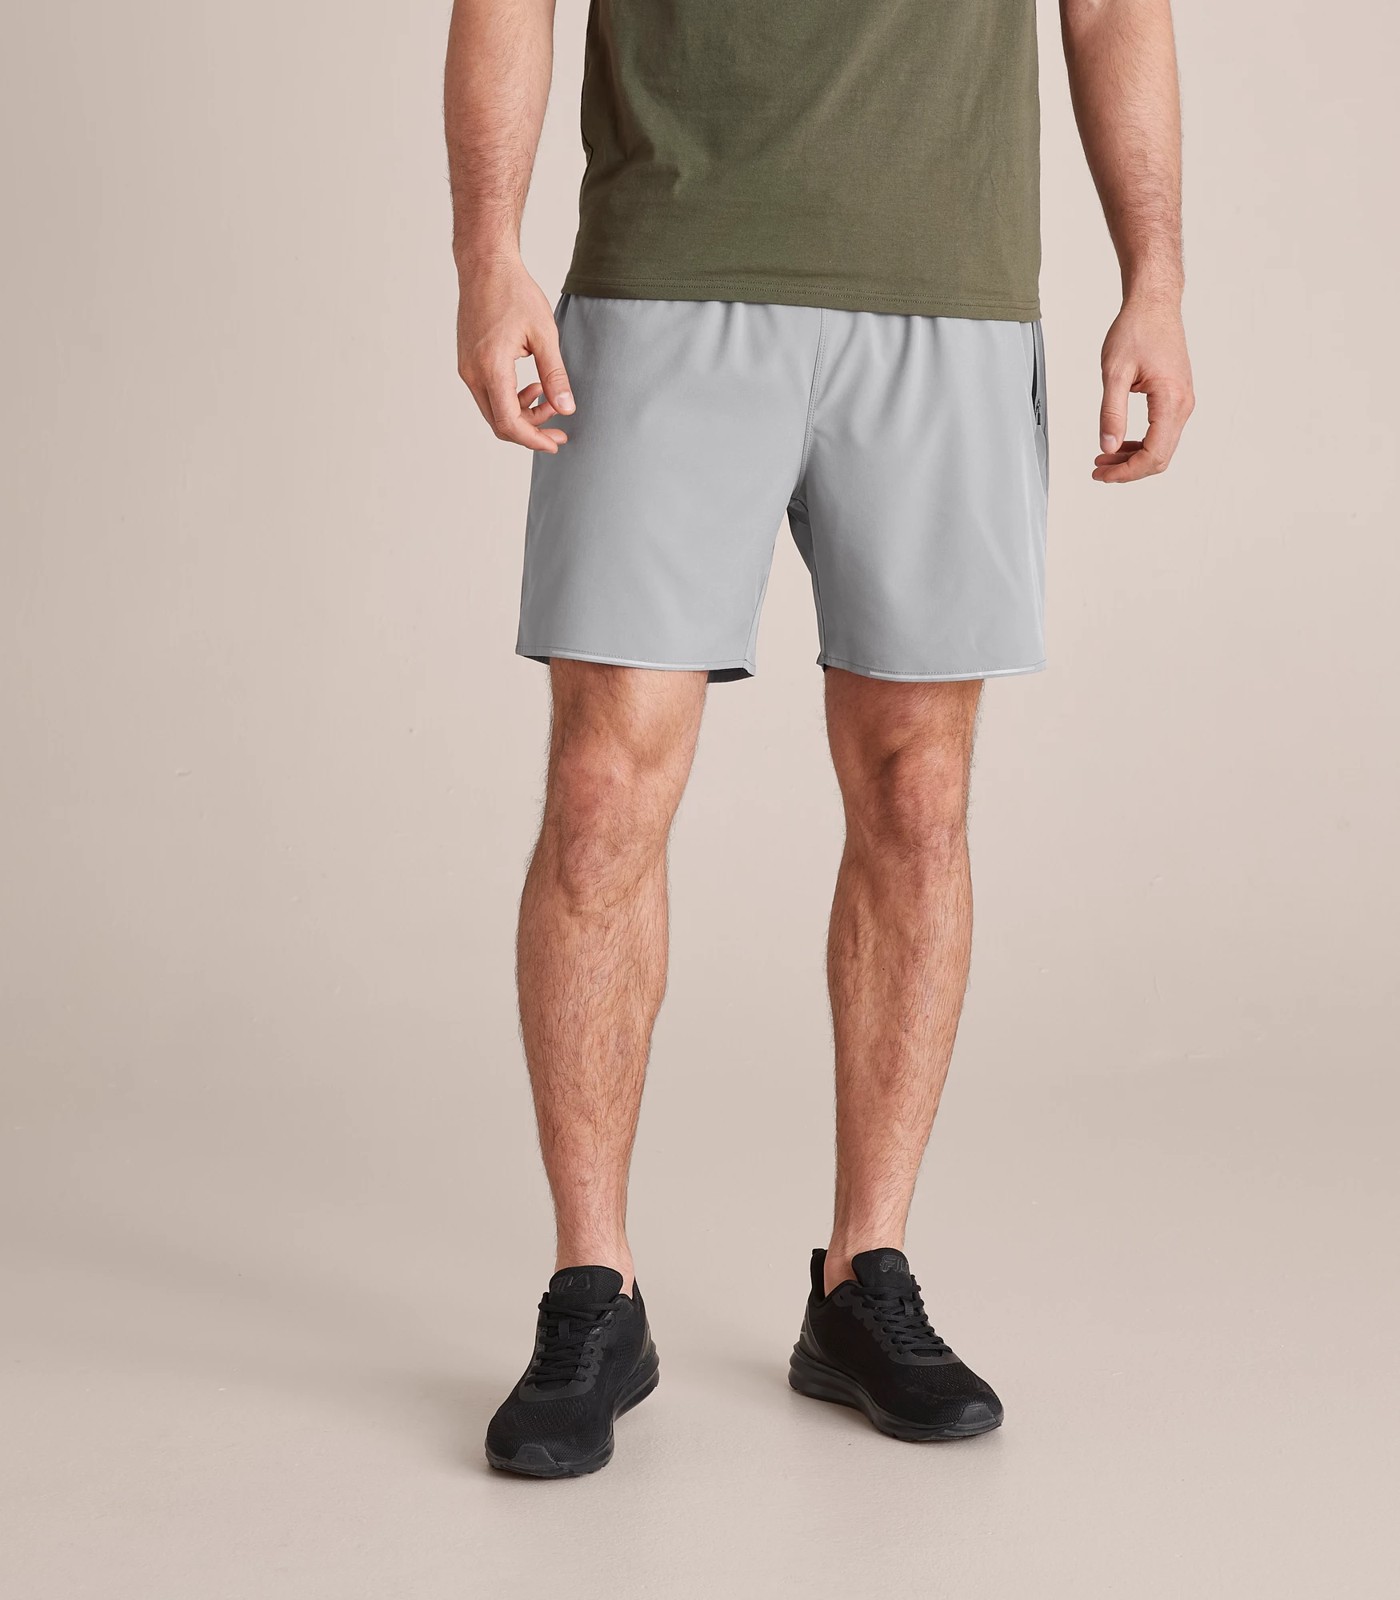 Active 2 in 1 Woven Shorts | Target Australia